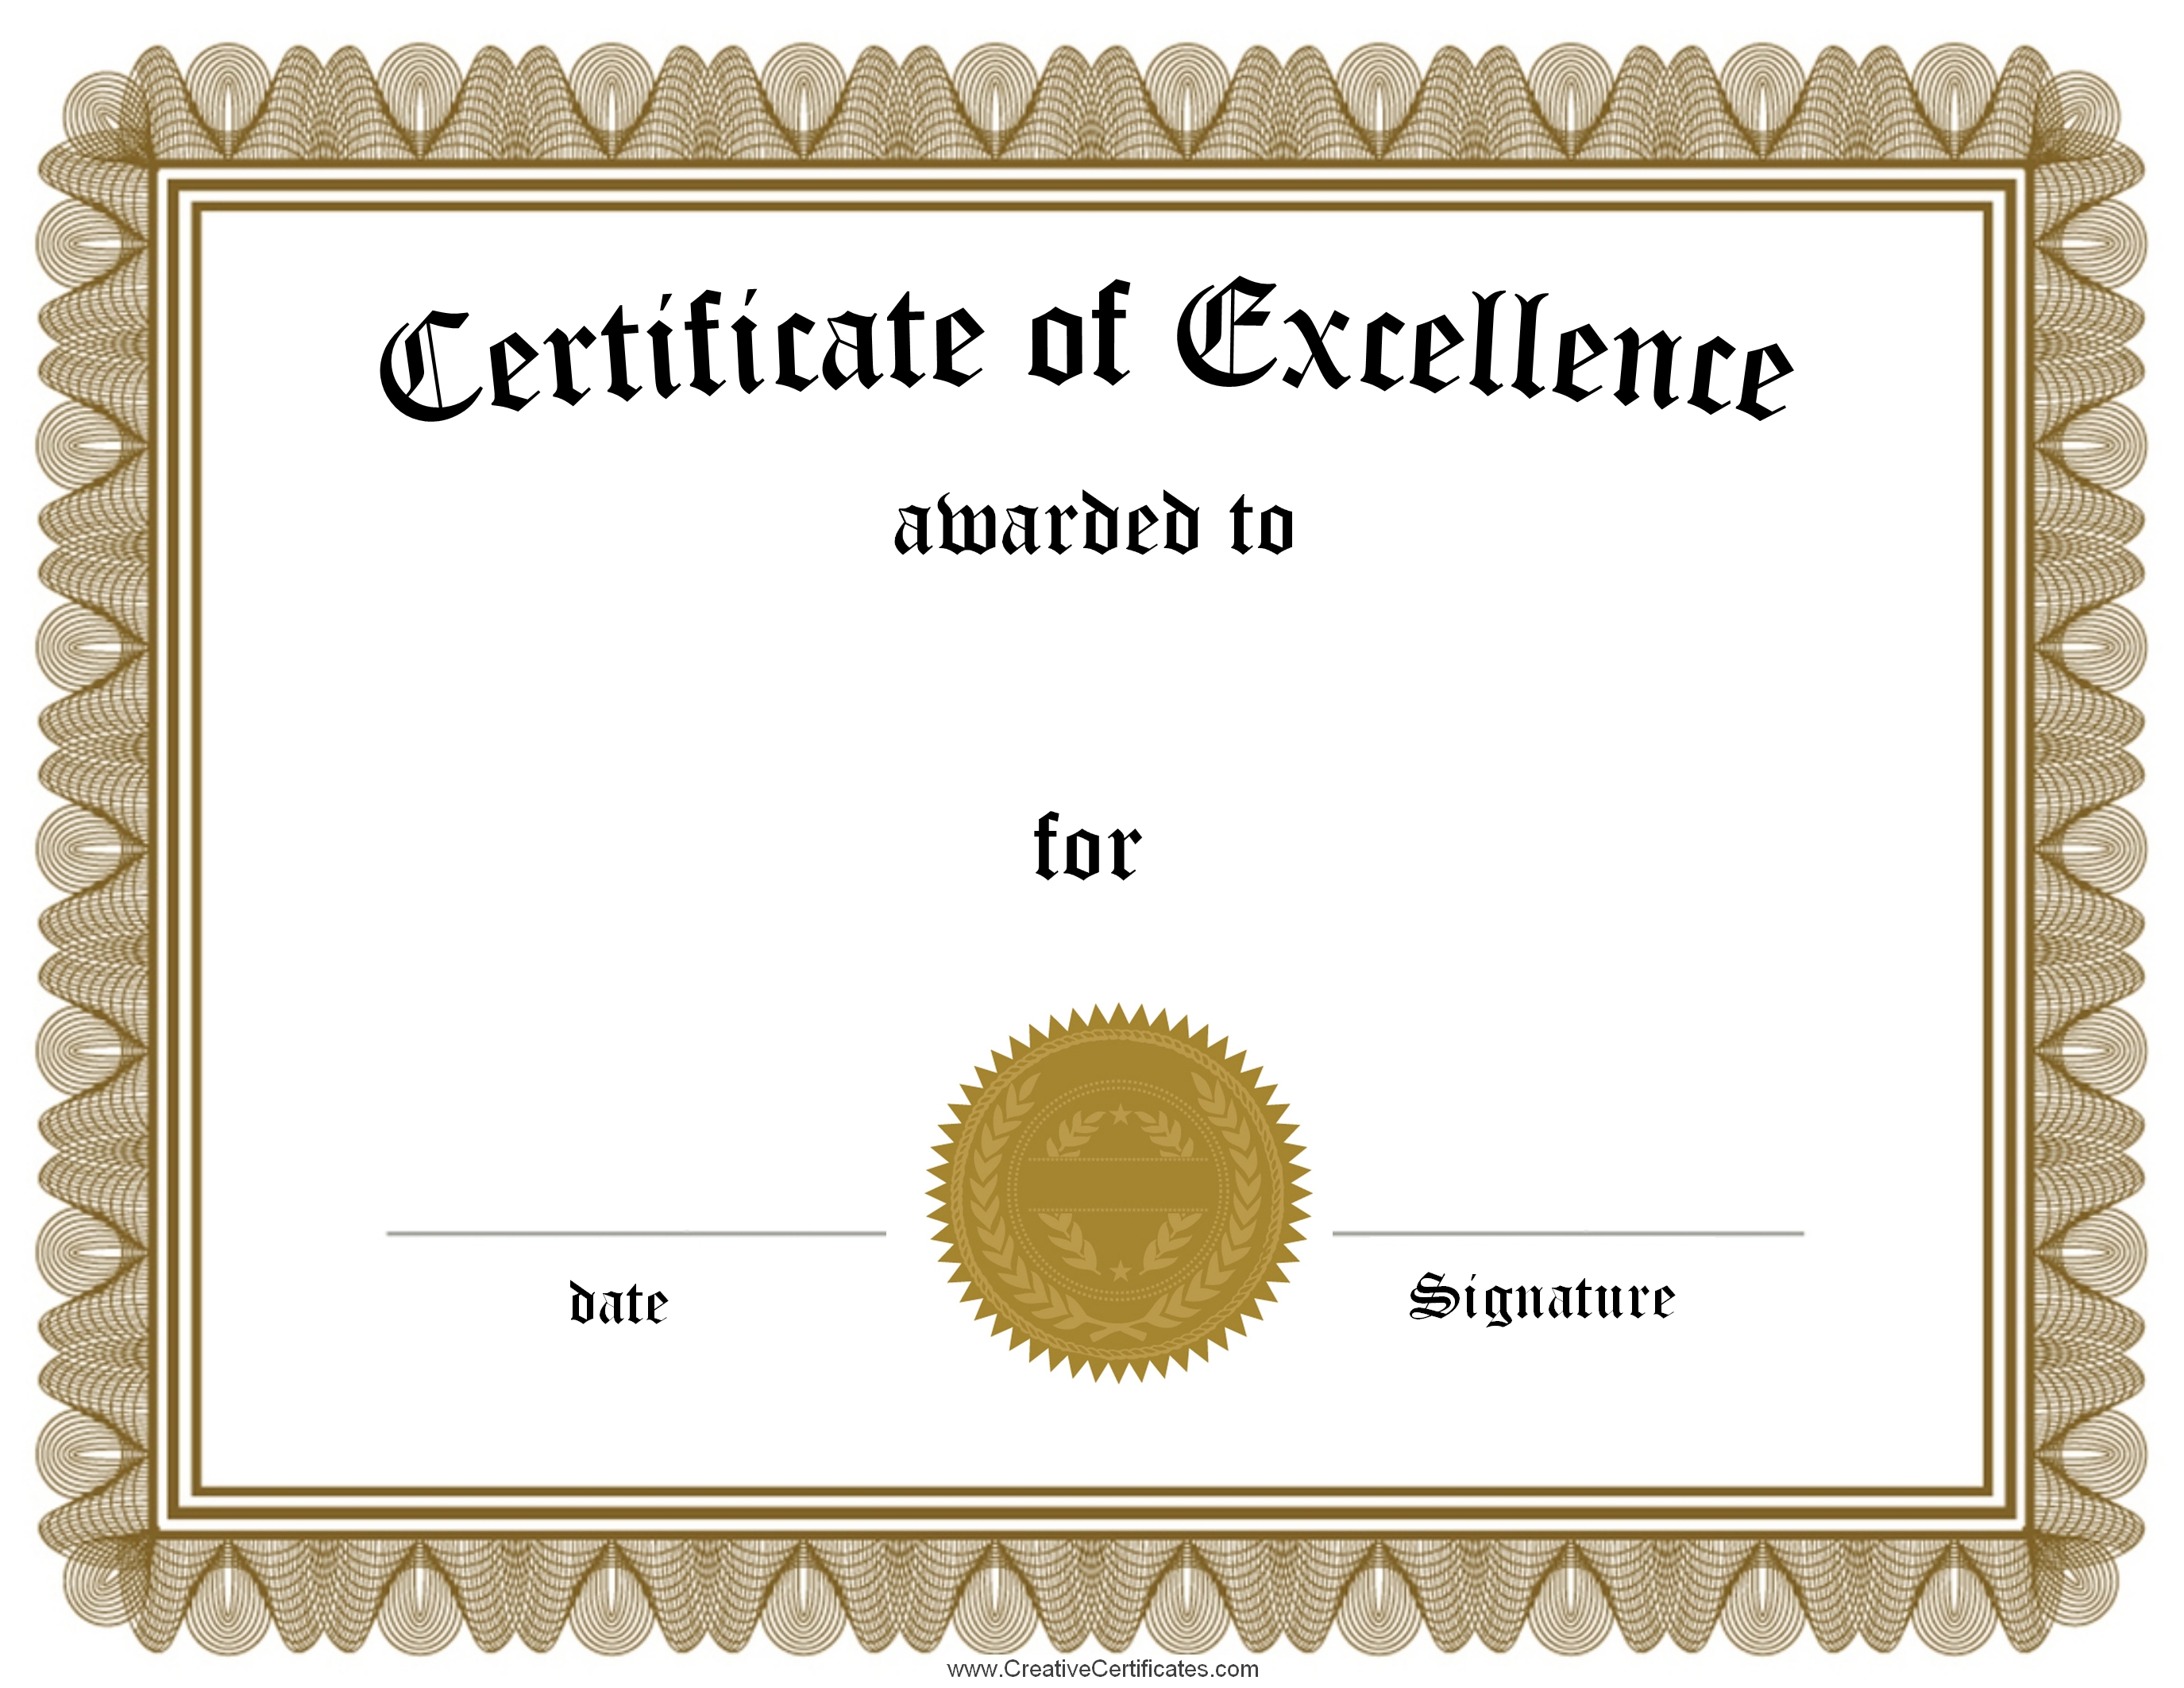 certificate of excellence meaning in school